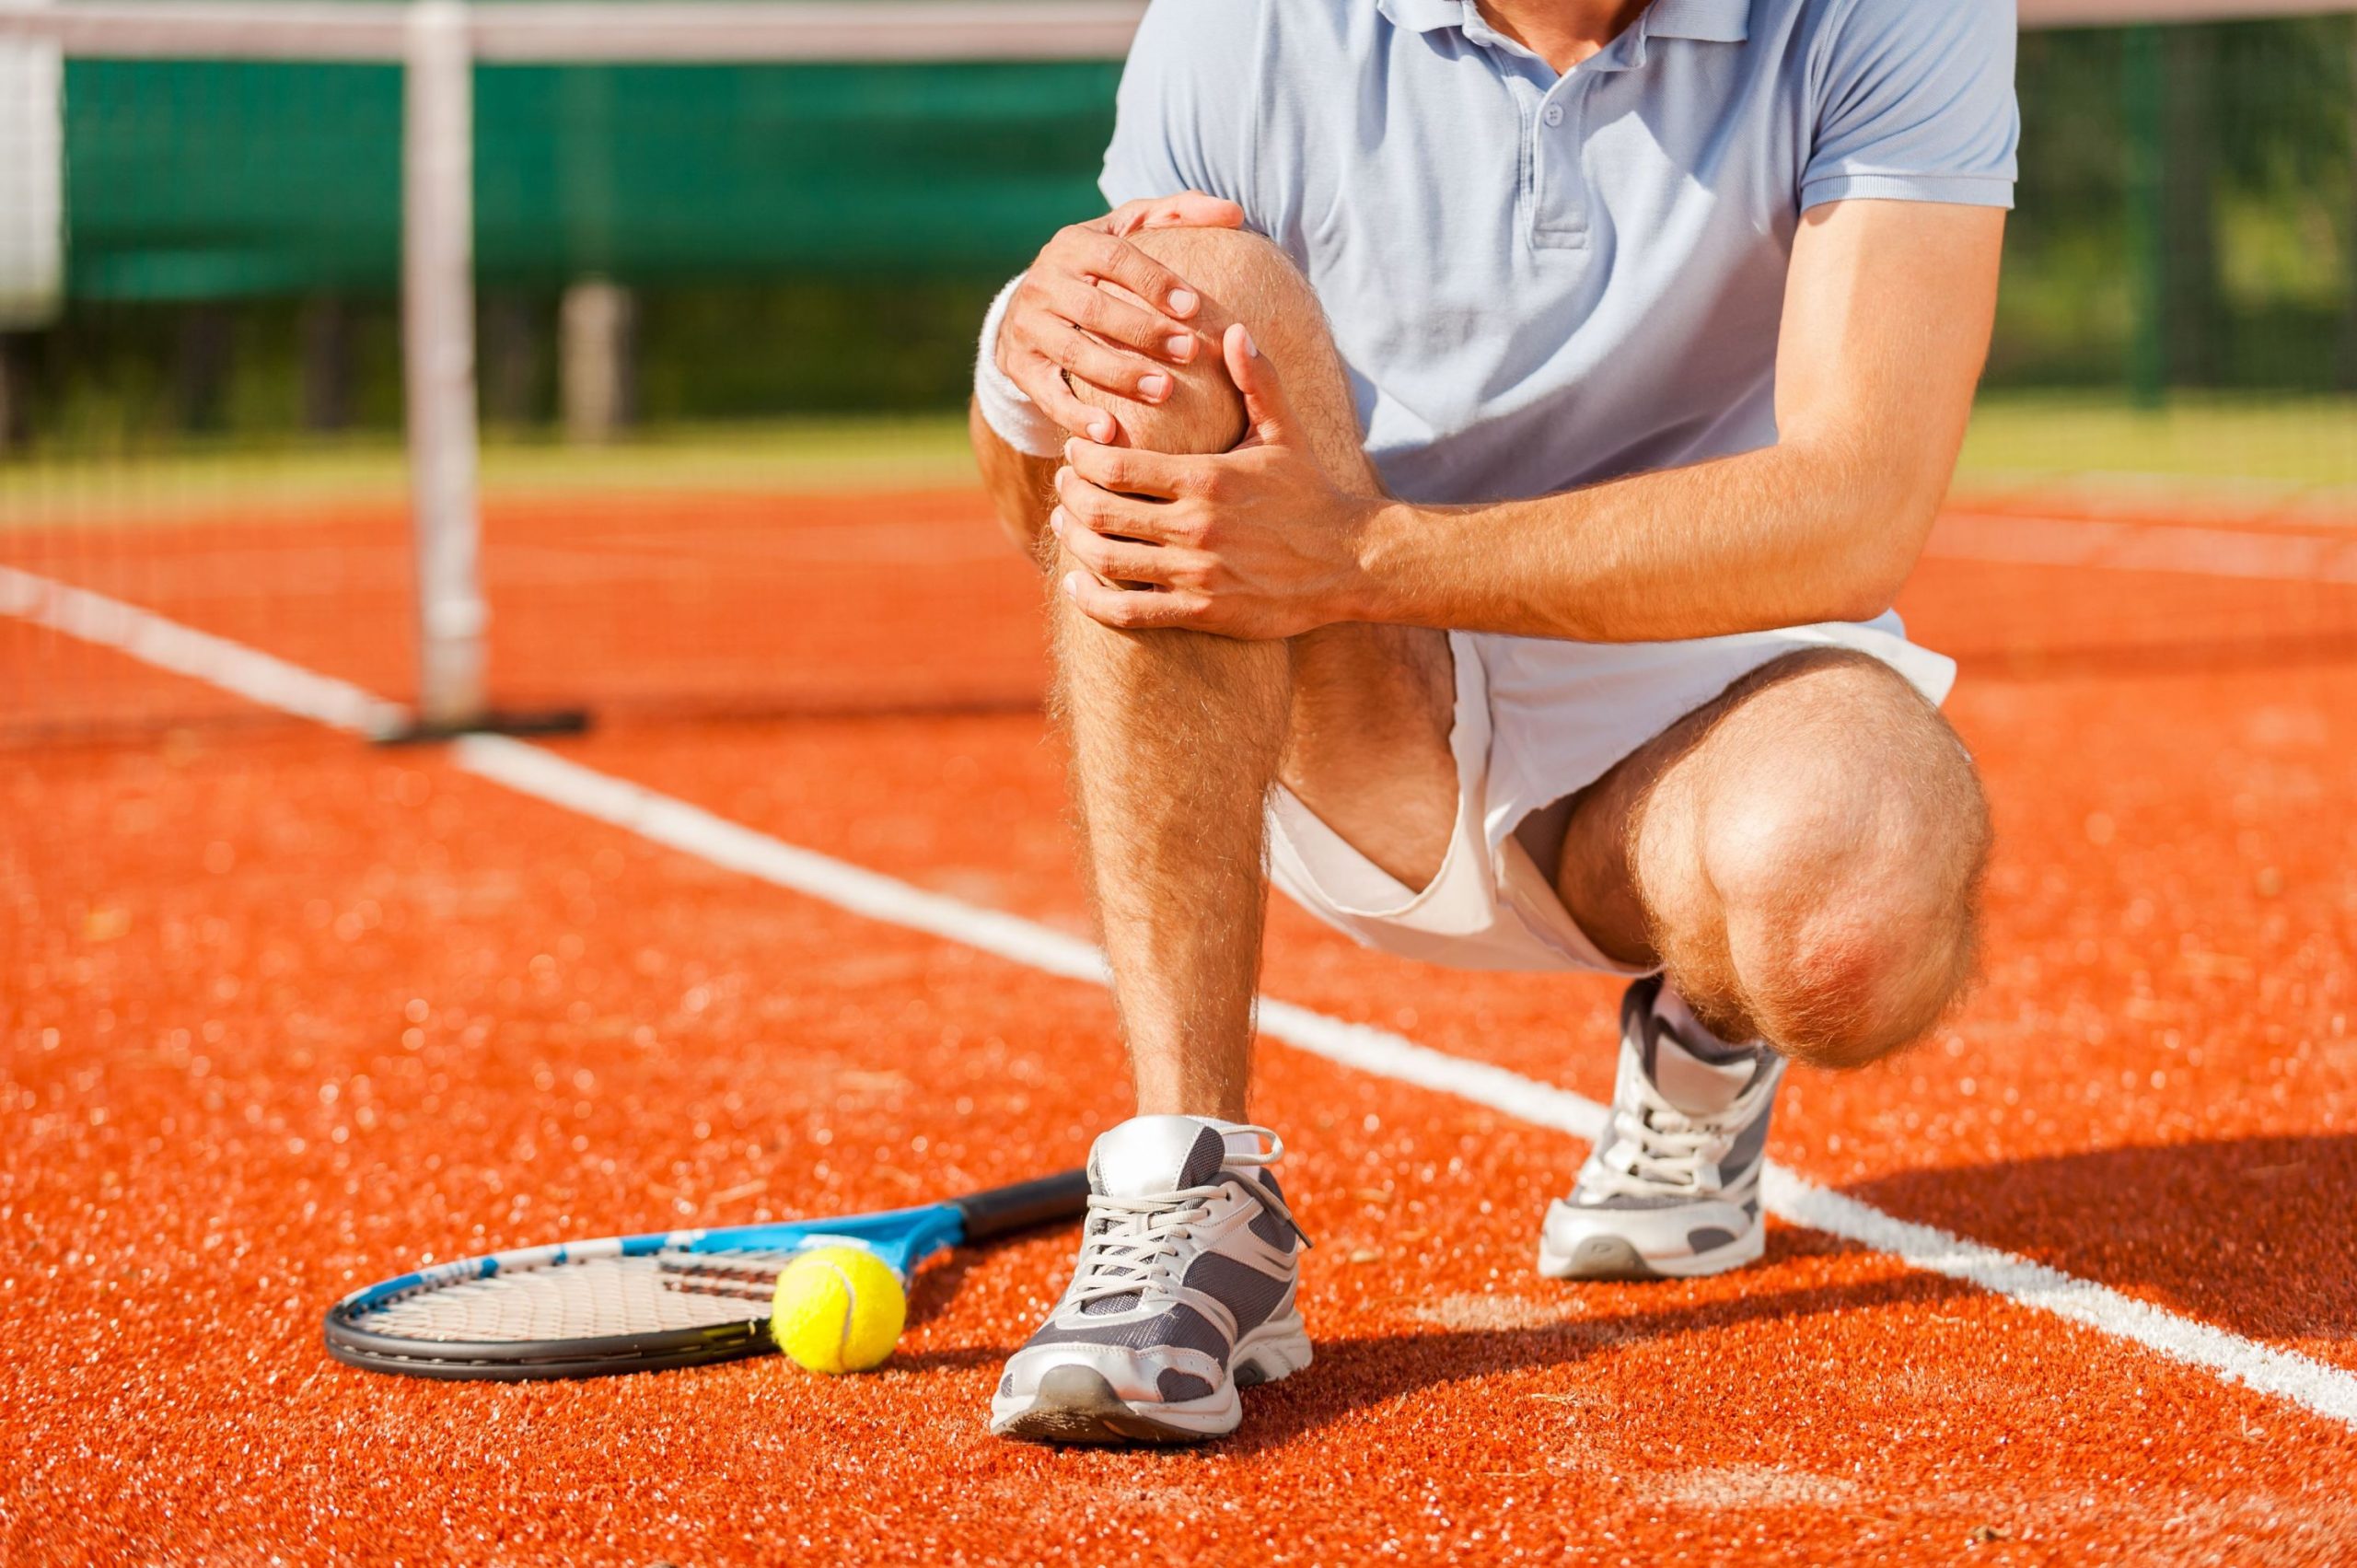 Do you have a sports injury?